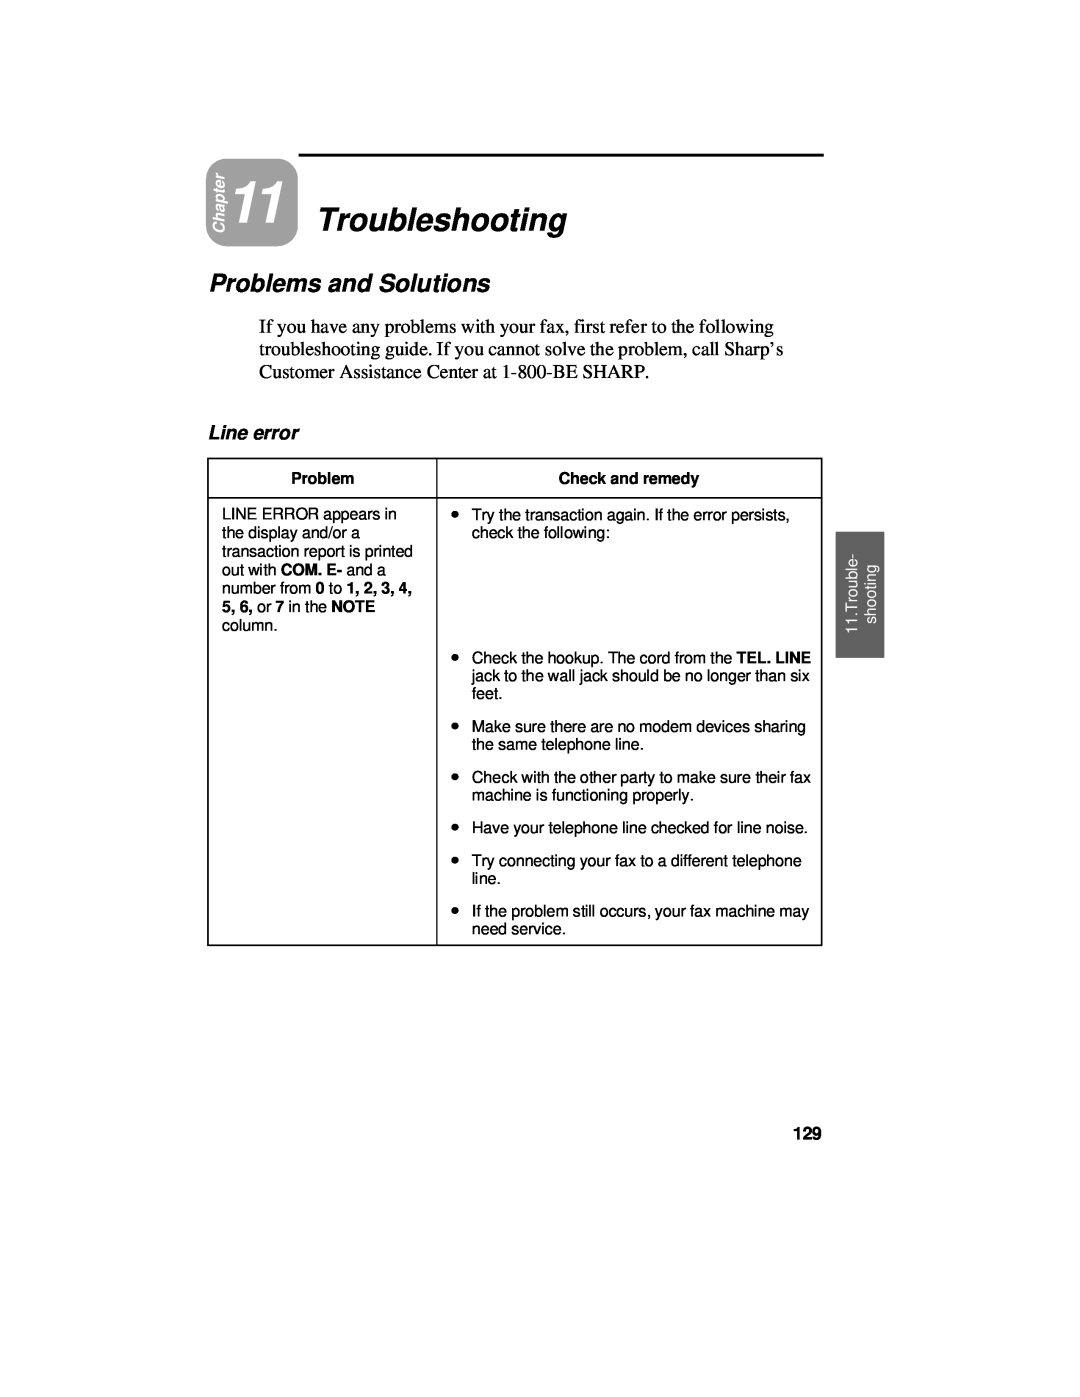 Sharp UX-460 operation manual Troubleshooting, Problems and Solutions, Line error, Check and remedy, 5, 6, or 7 in the NOTE 